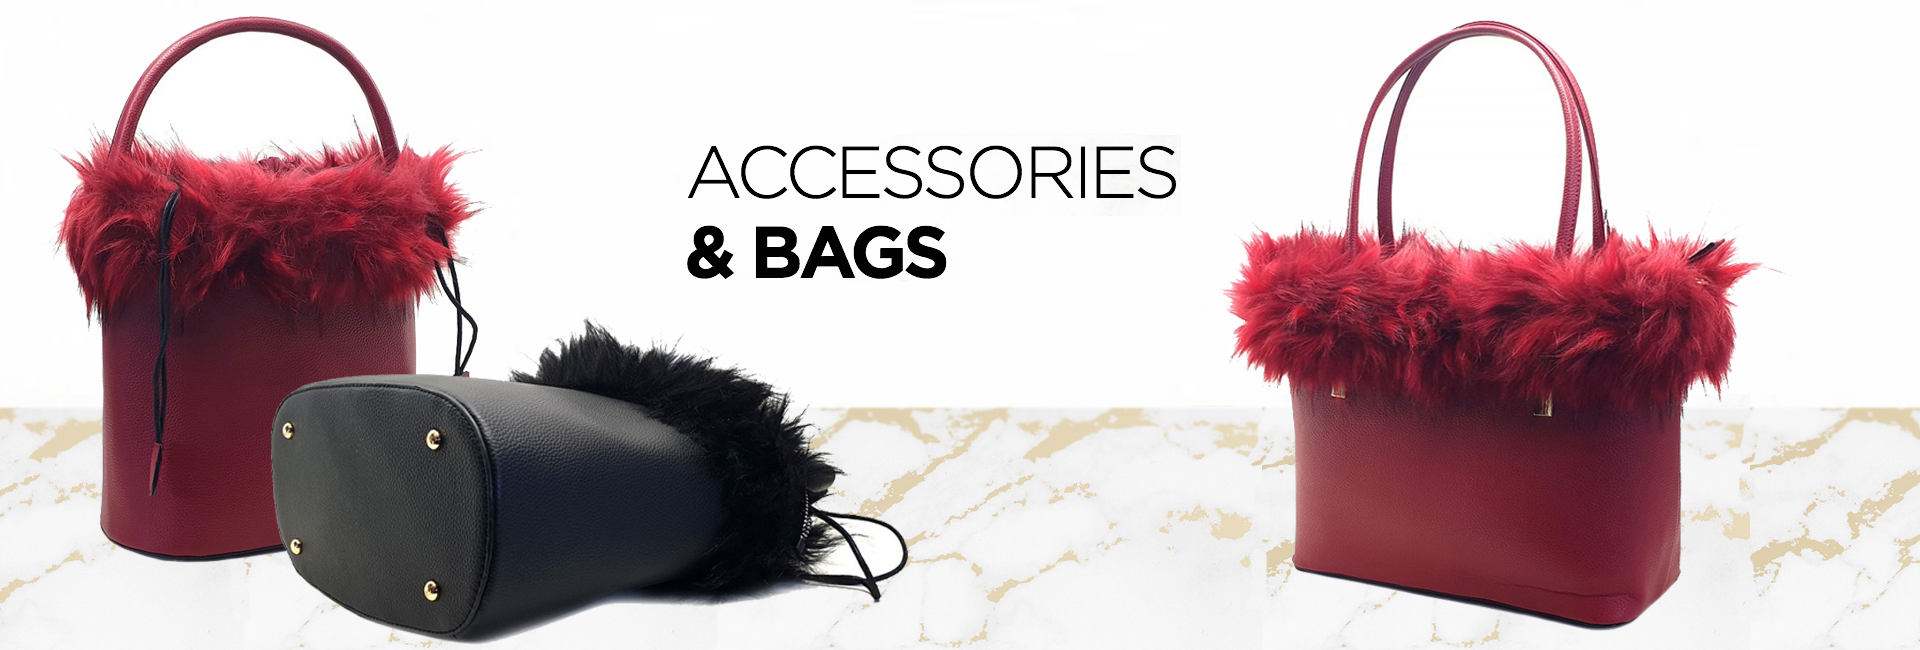 Accessories & Bags